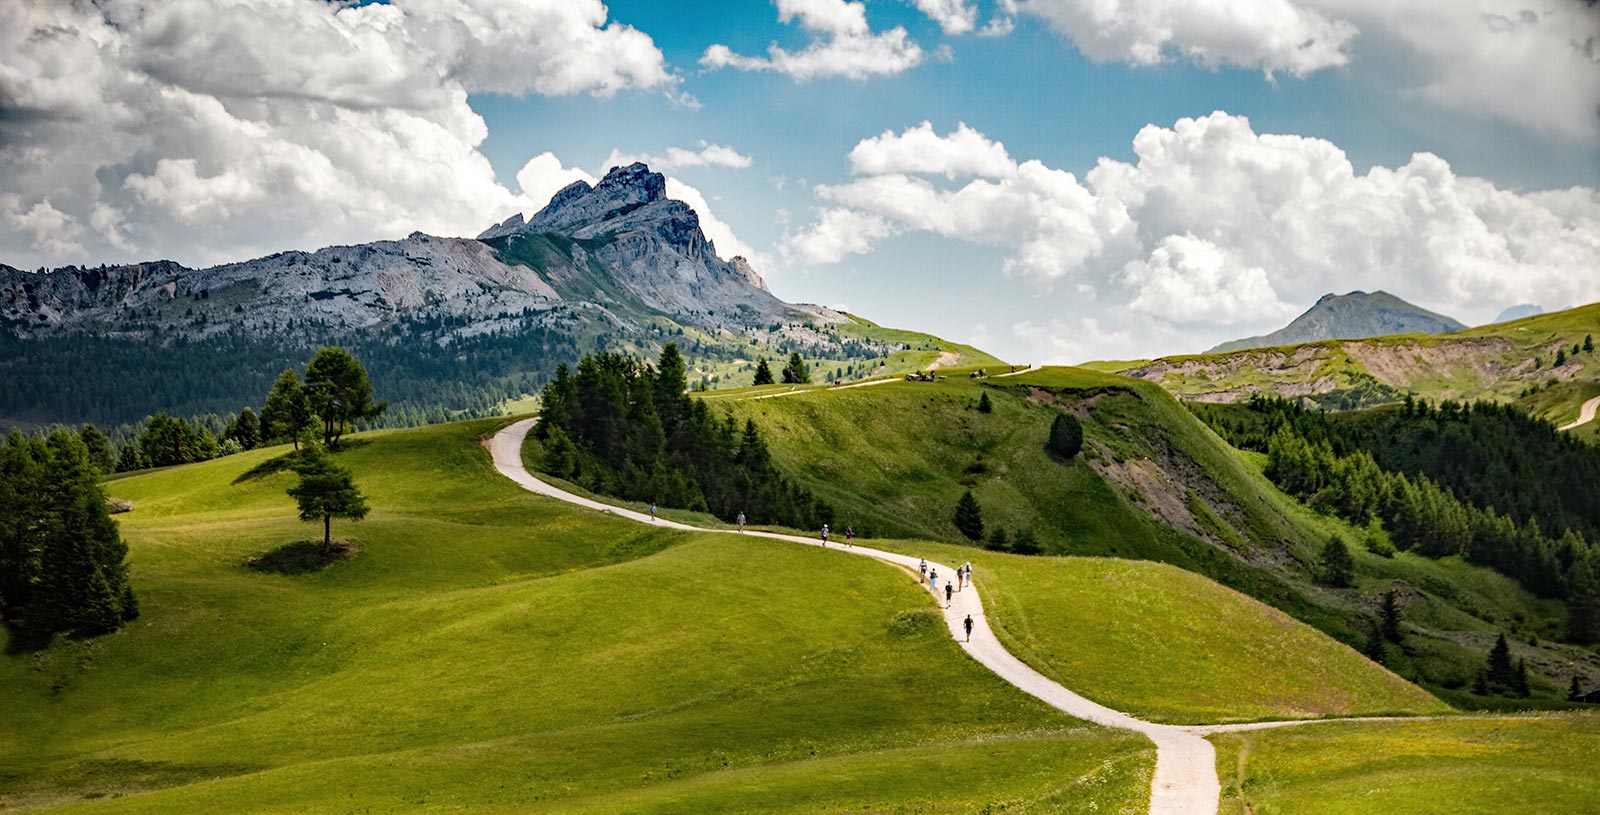 The mountains of the Alta Badia in different shades of green